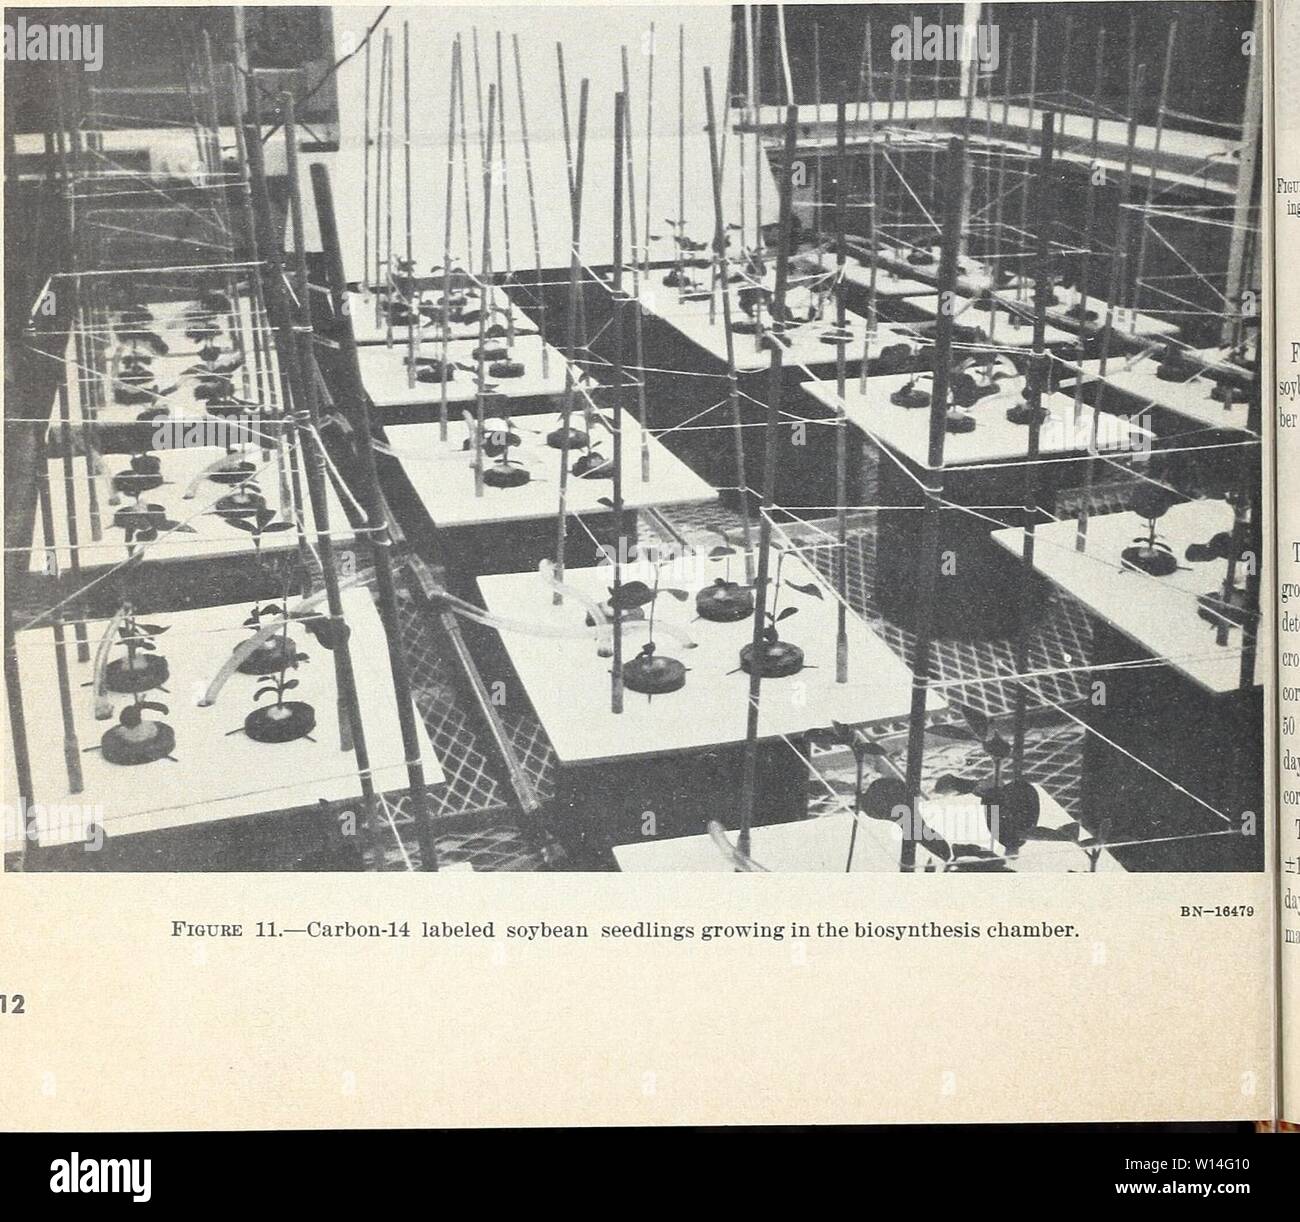 Archive image from page 13 of Design and operation of a. Design and operation of a carbon-14 biosynthesis chamber . designoperationo911smit Year: 1962  p.p.m. of Chel 138 (ethylenediaminedihydroxy- phenlyacetic acid) supplied all the iron necessary for normal plant growth. With wheat the iron requirement was met with 10 p.p.m. ferric chloride. Corn required both Chel 138 at 10 p.p.m. and ferric chloride at 15 p.p.m. The plants were placed in the chamber and ob- served a day or two to make certain they were all living, then the door was installed and the cham- ber sealed. Radioactive C02 was ad Stock Photo